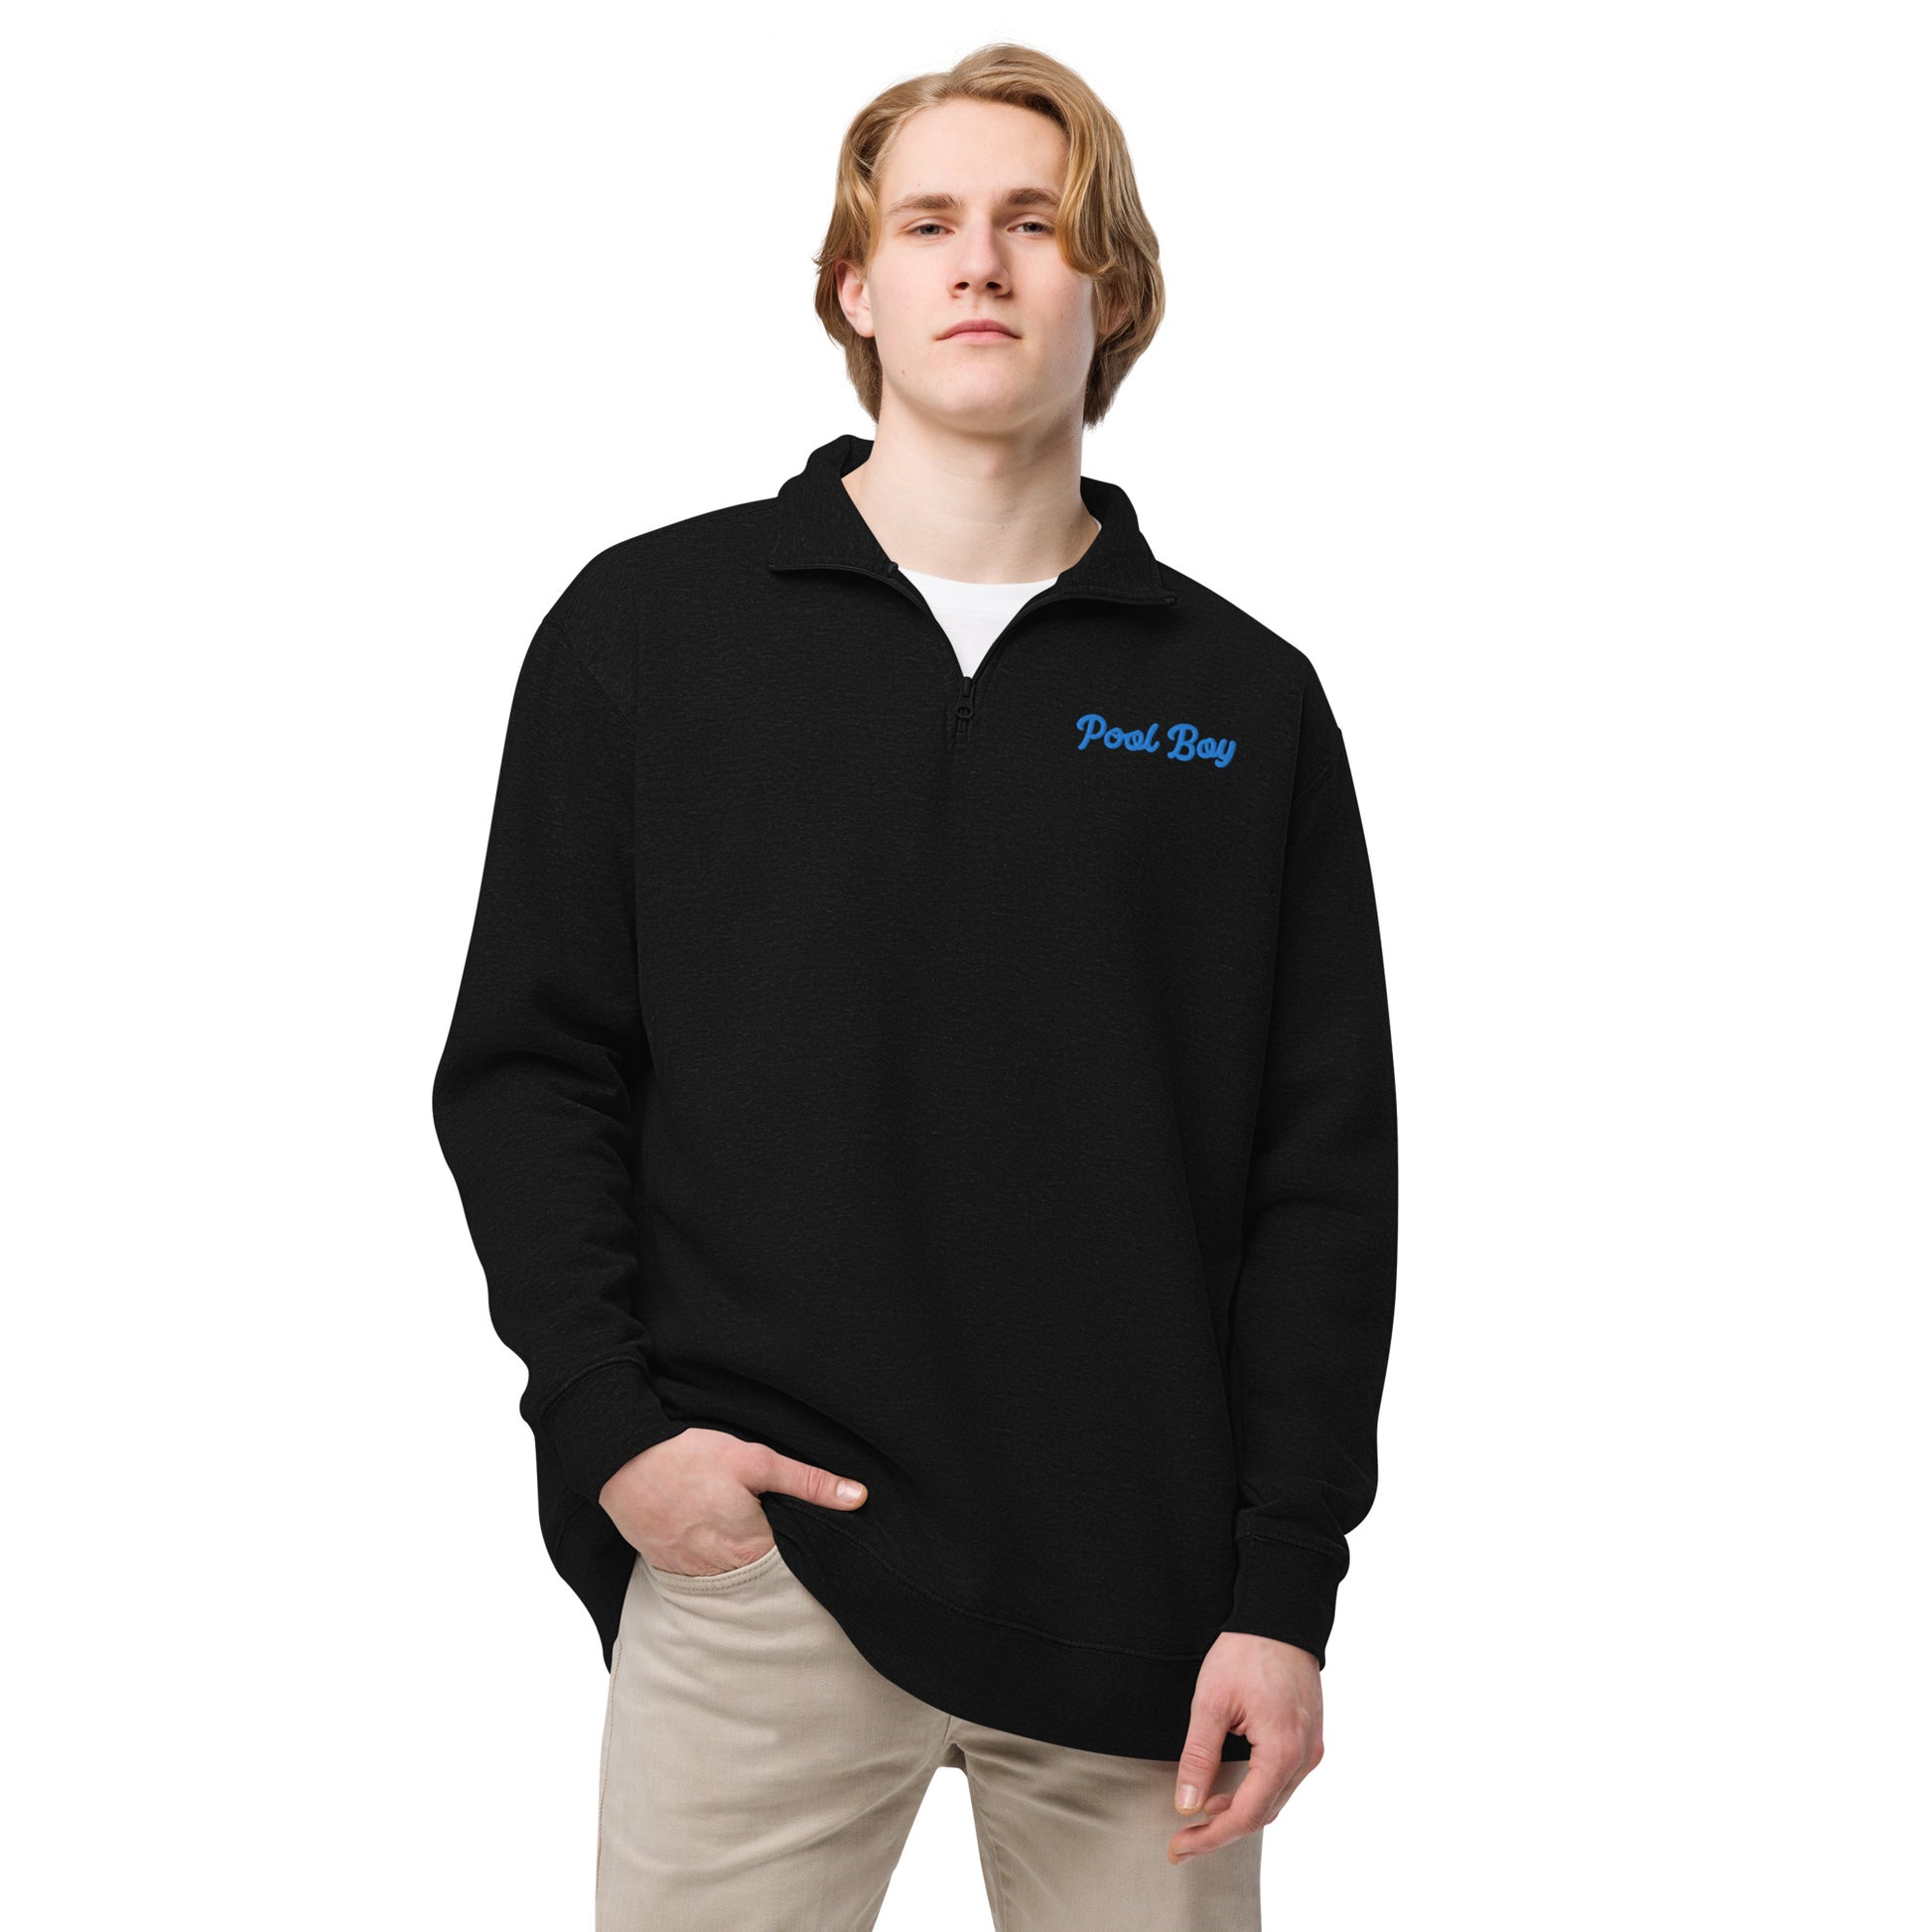 Pool Boy Embroidered Unisex Fleece Pullover - TrendySwimmer